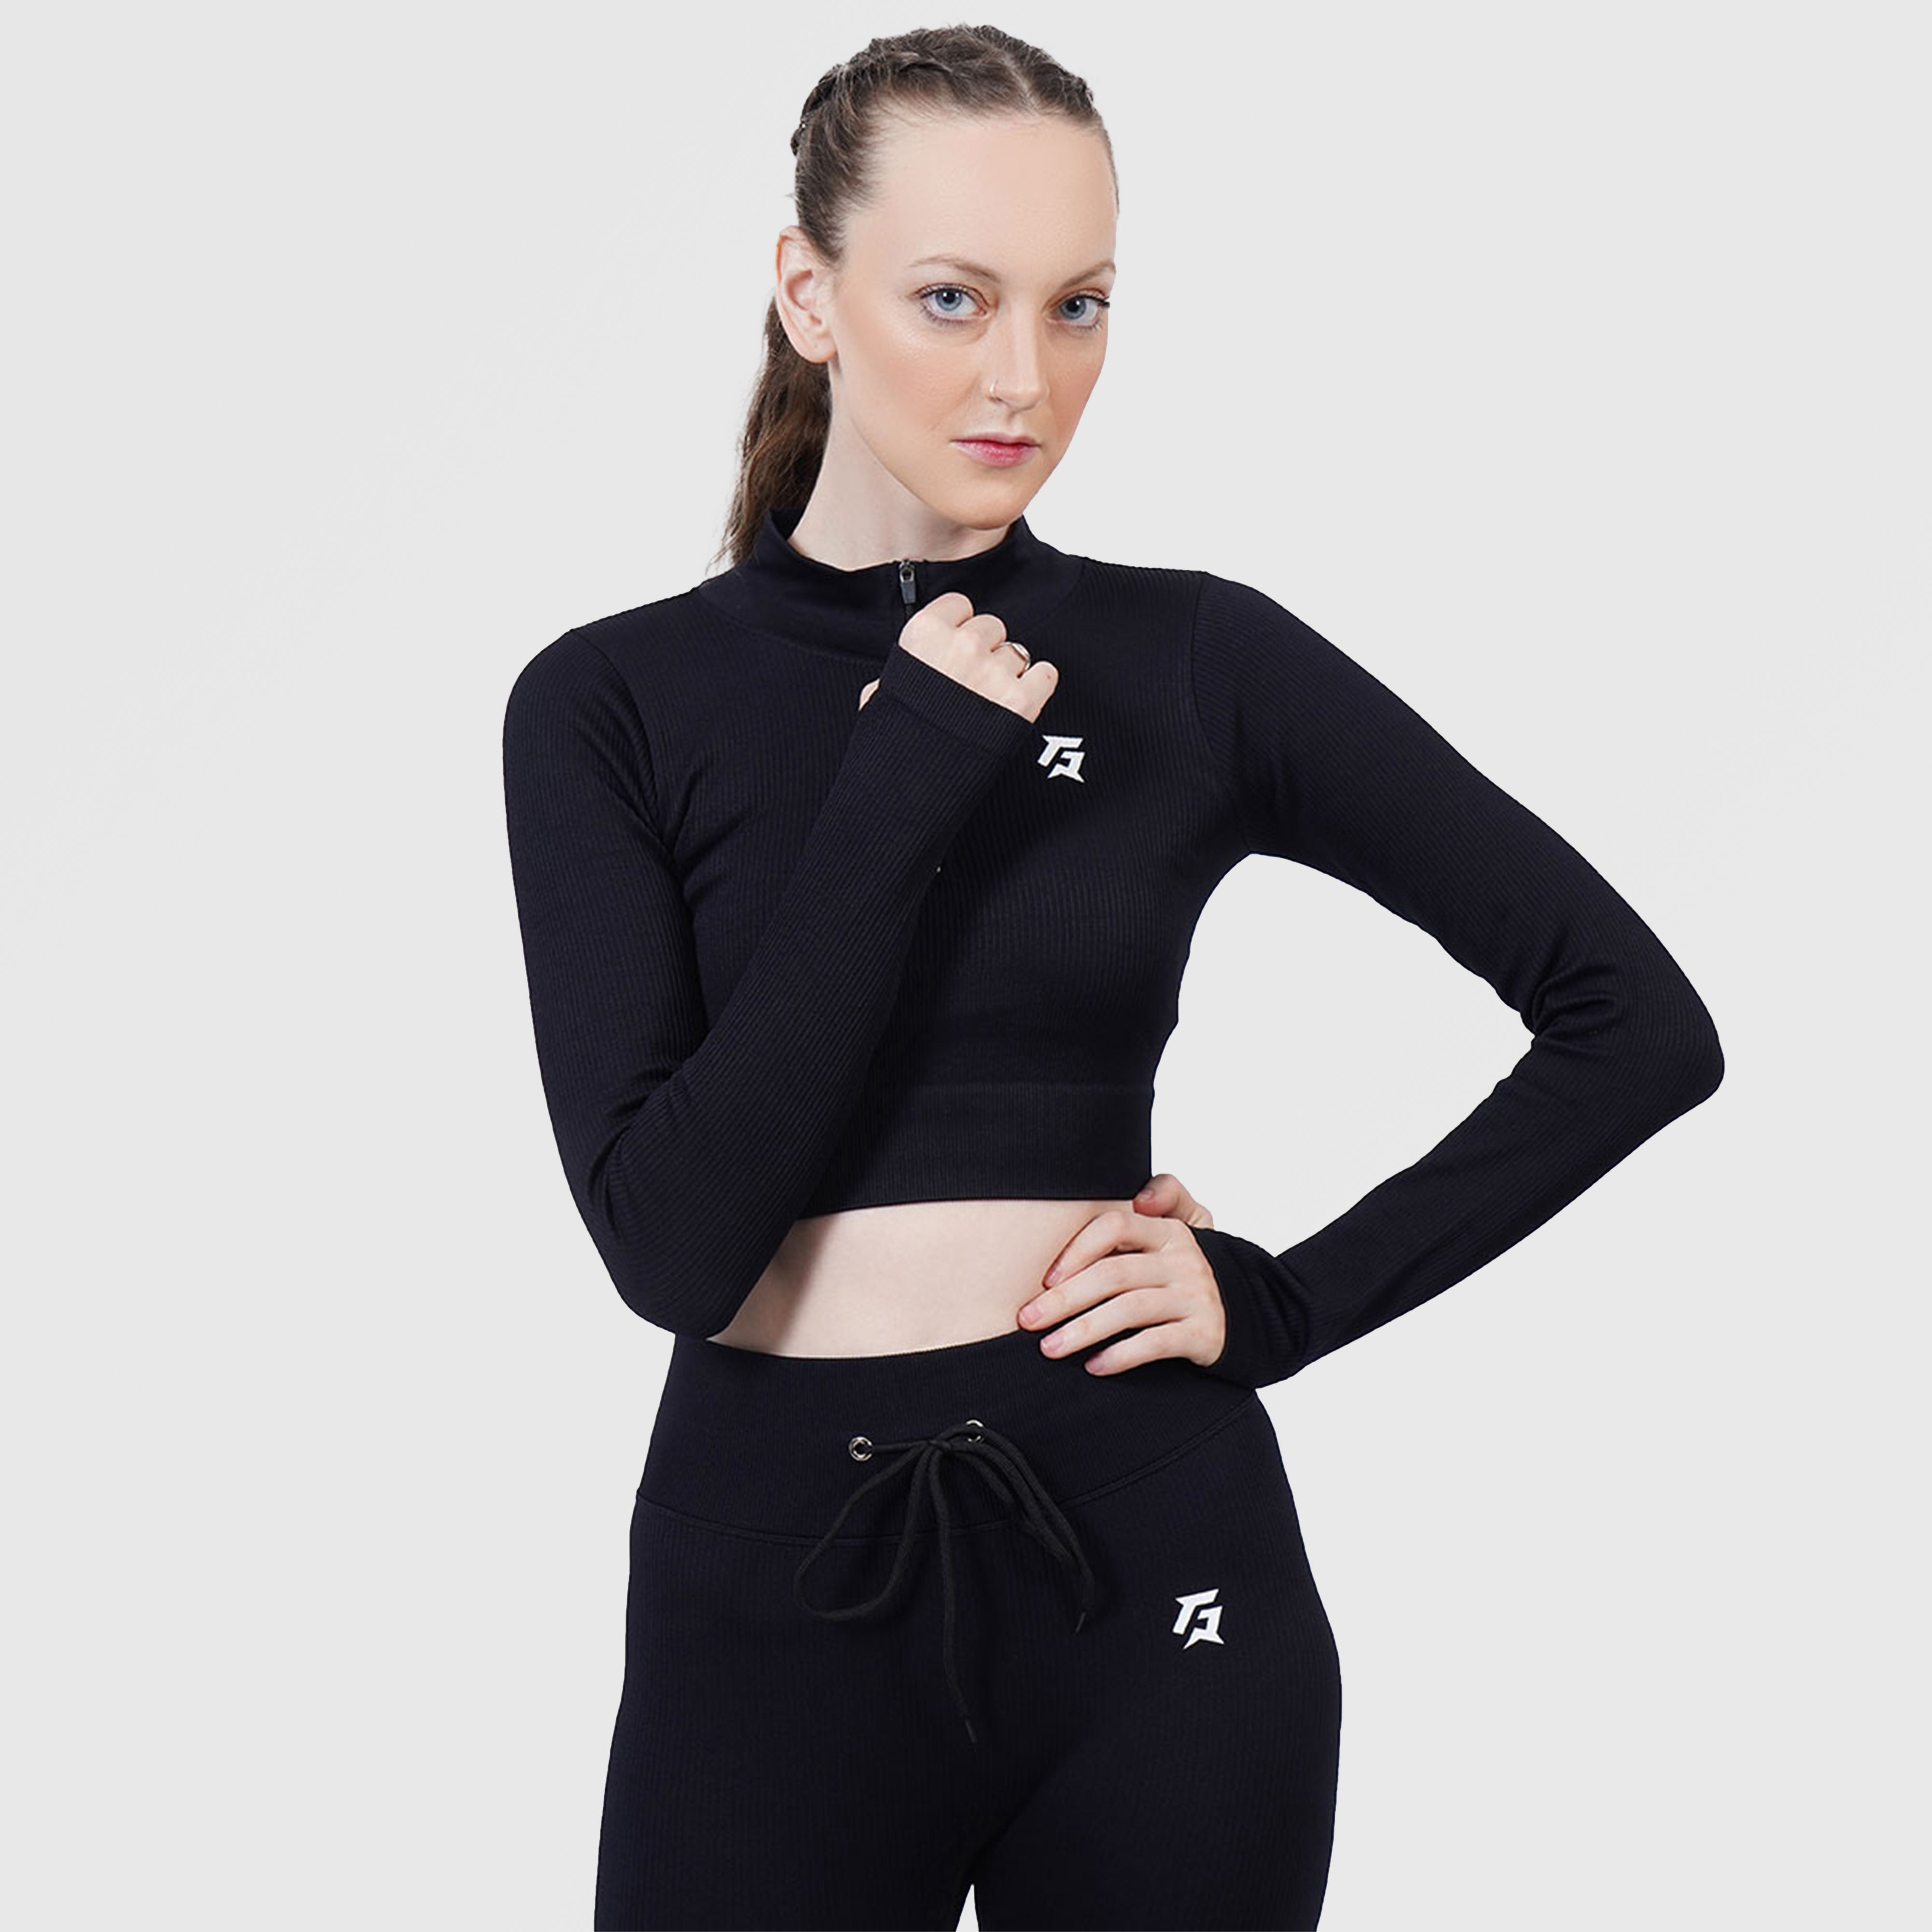 Fitness Ribbed Crop Top (Black)